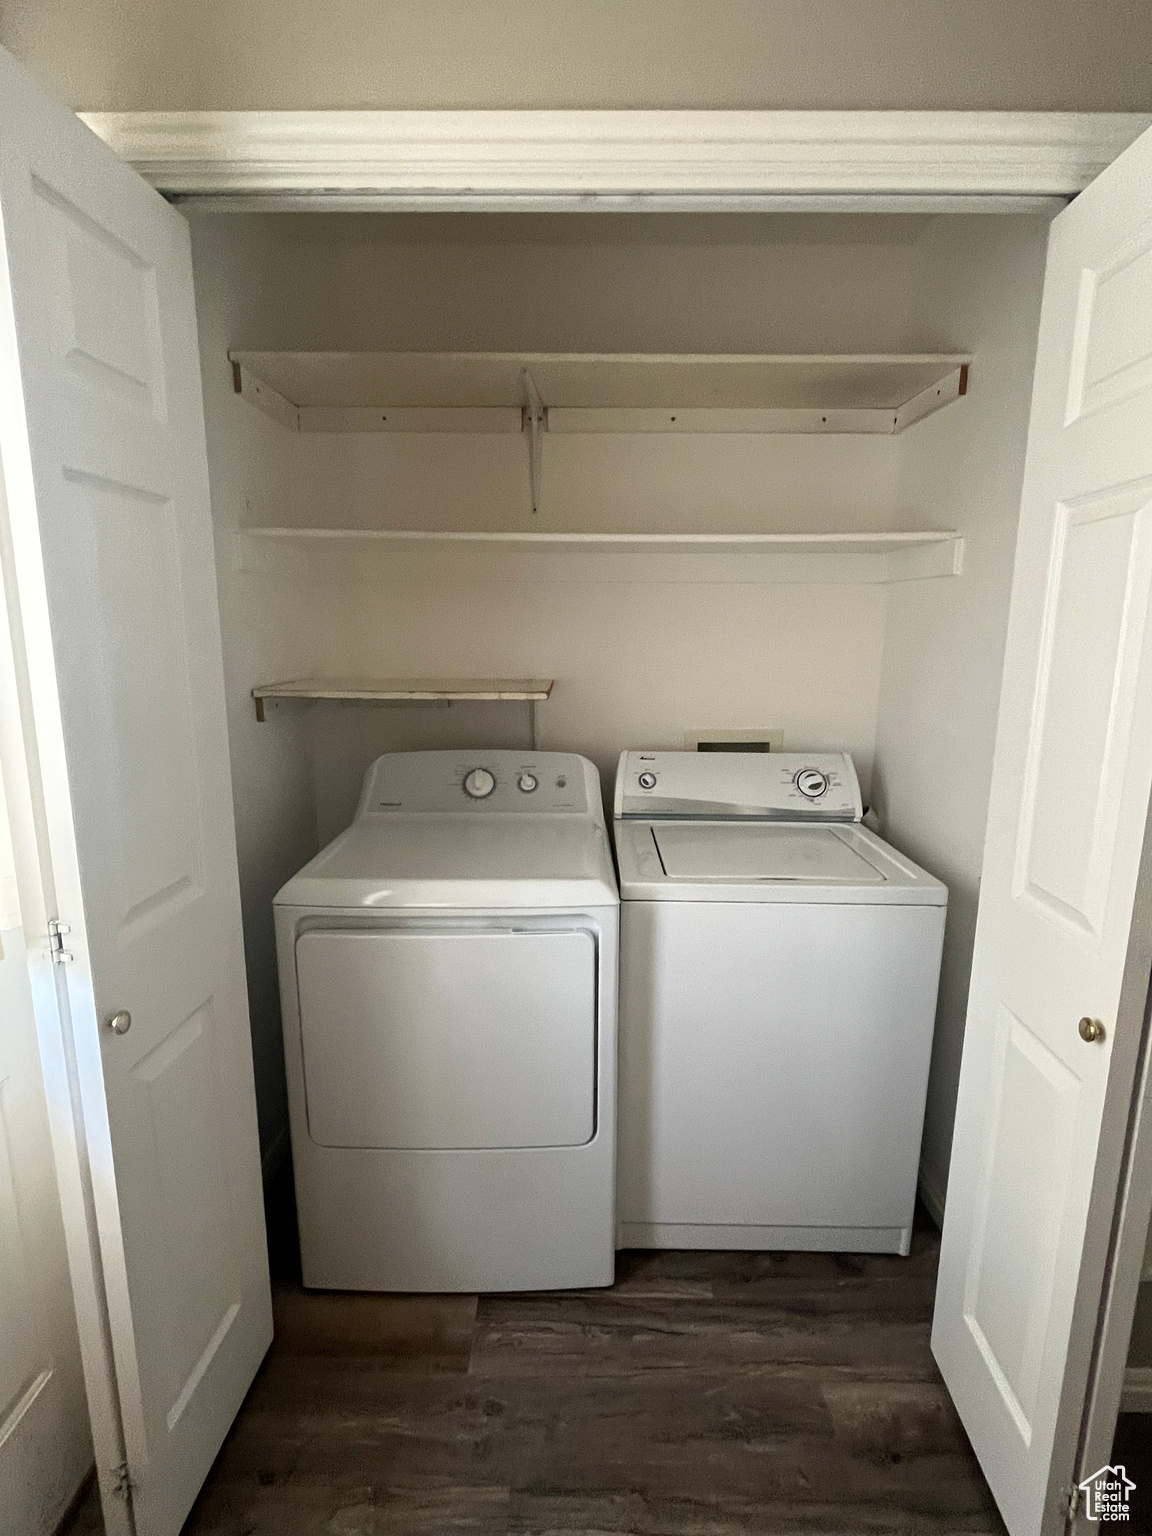 Clothes washing area featuring dark hardwood / wood-style flooring and separate washer and dryer